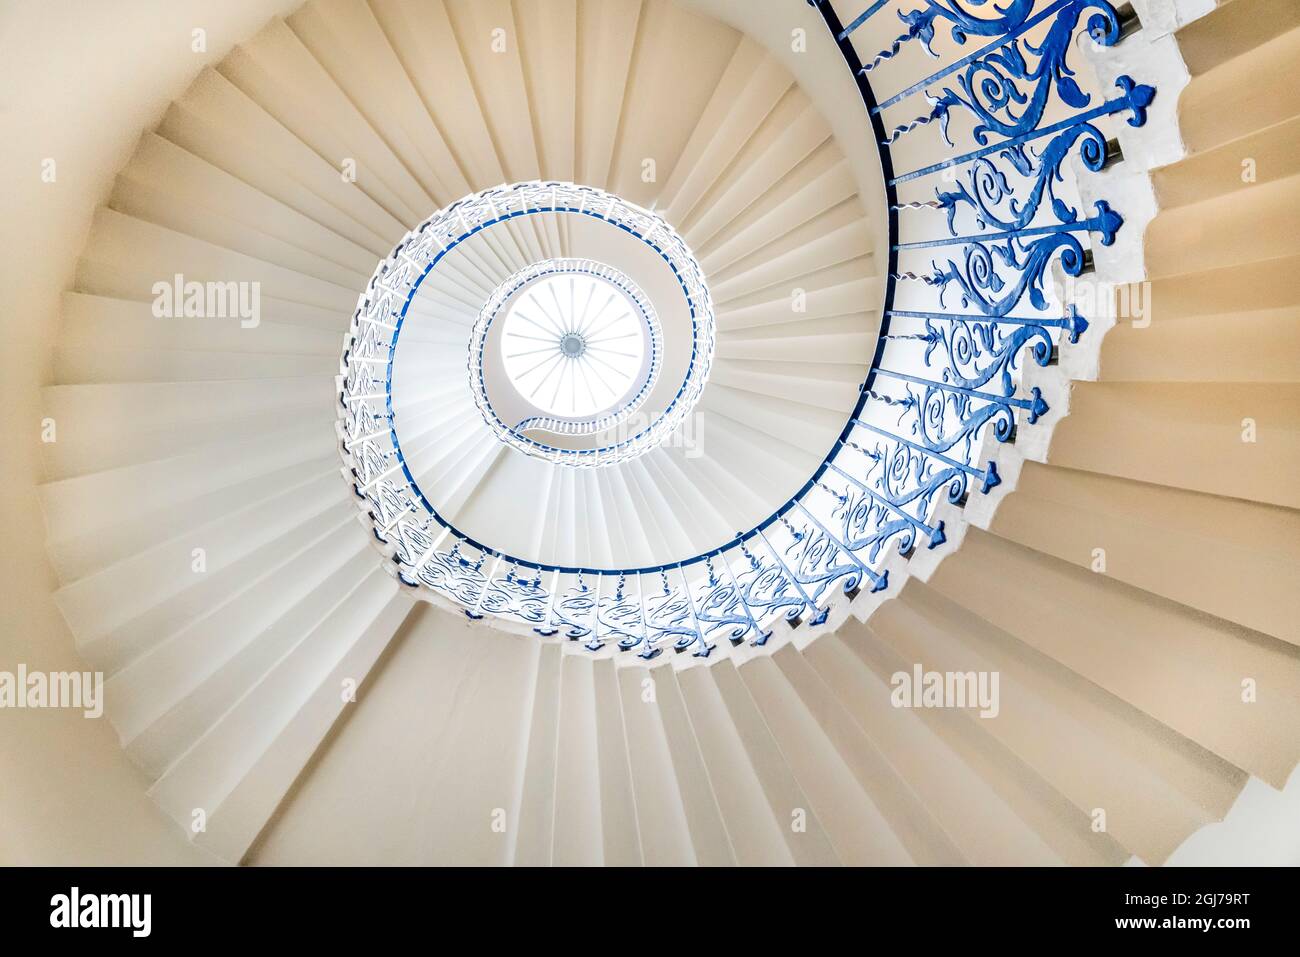 The Tulip Stairs, Queen’s House, Greenwich, London, UK. Stock Photo